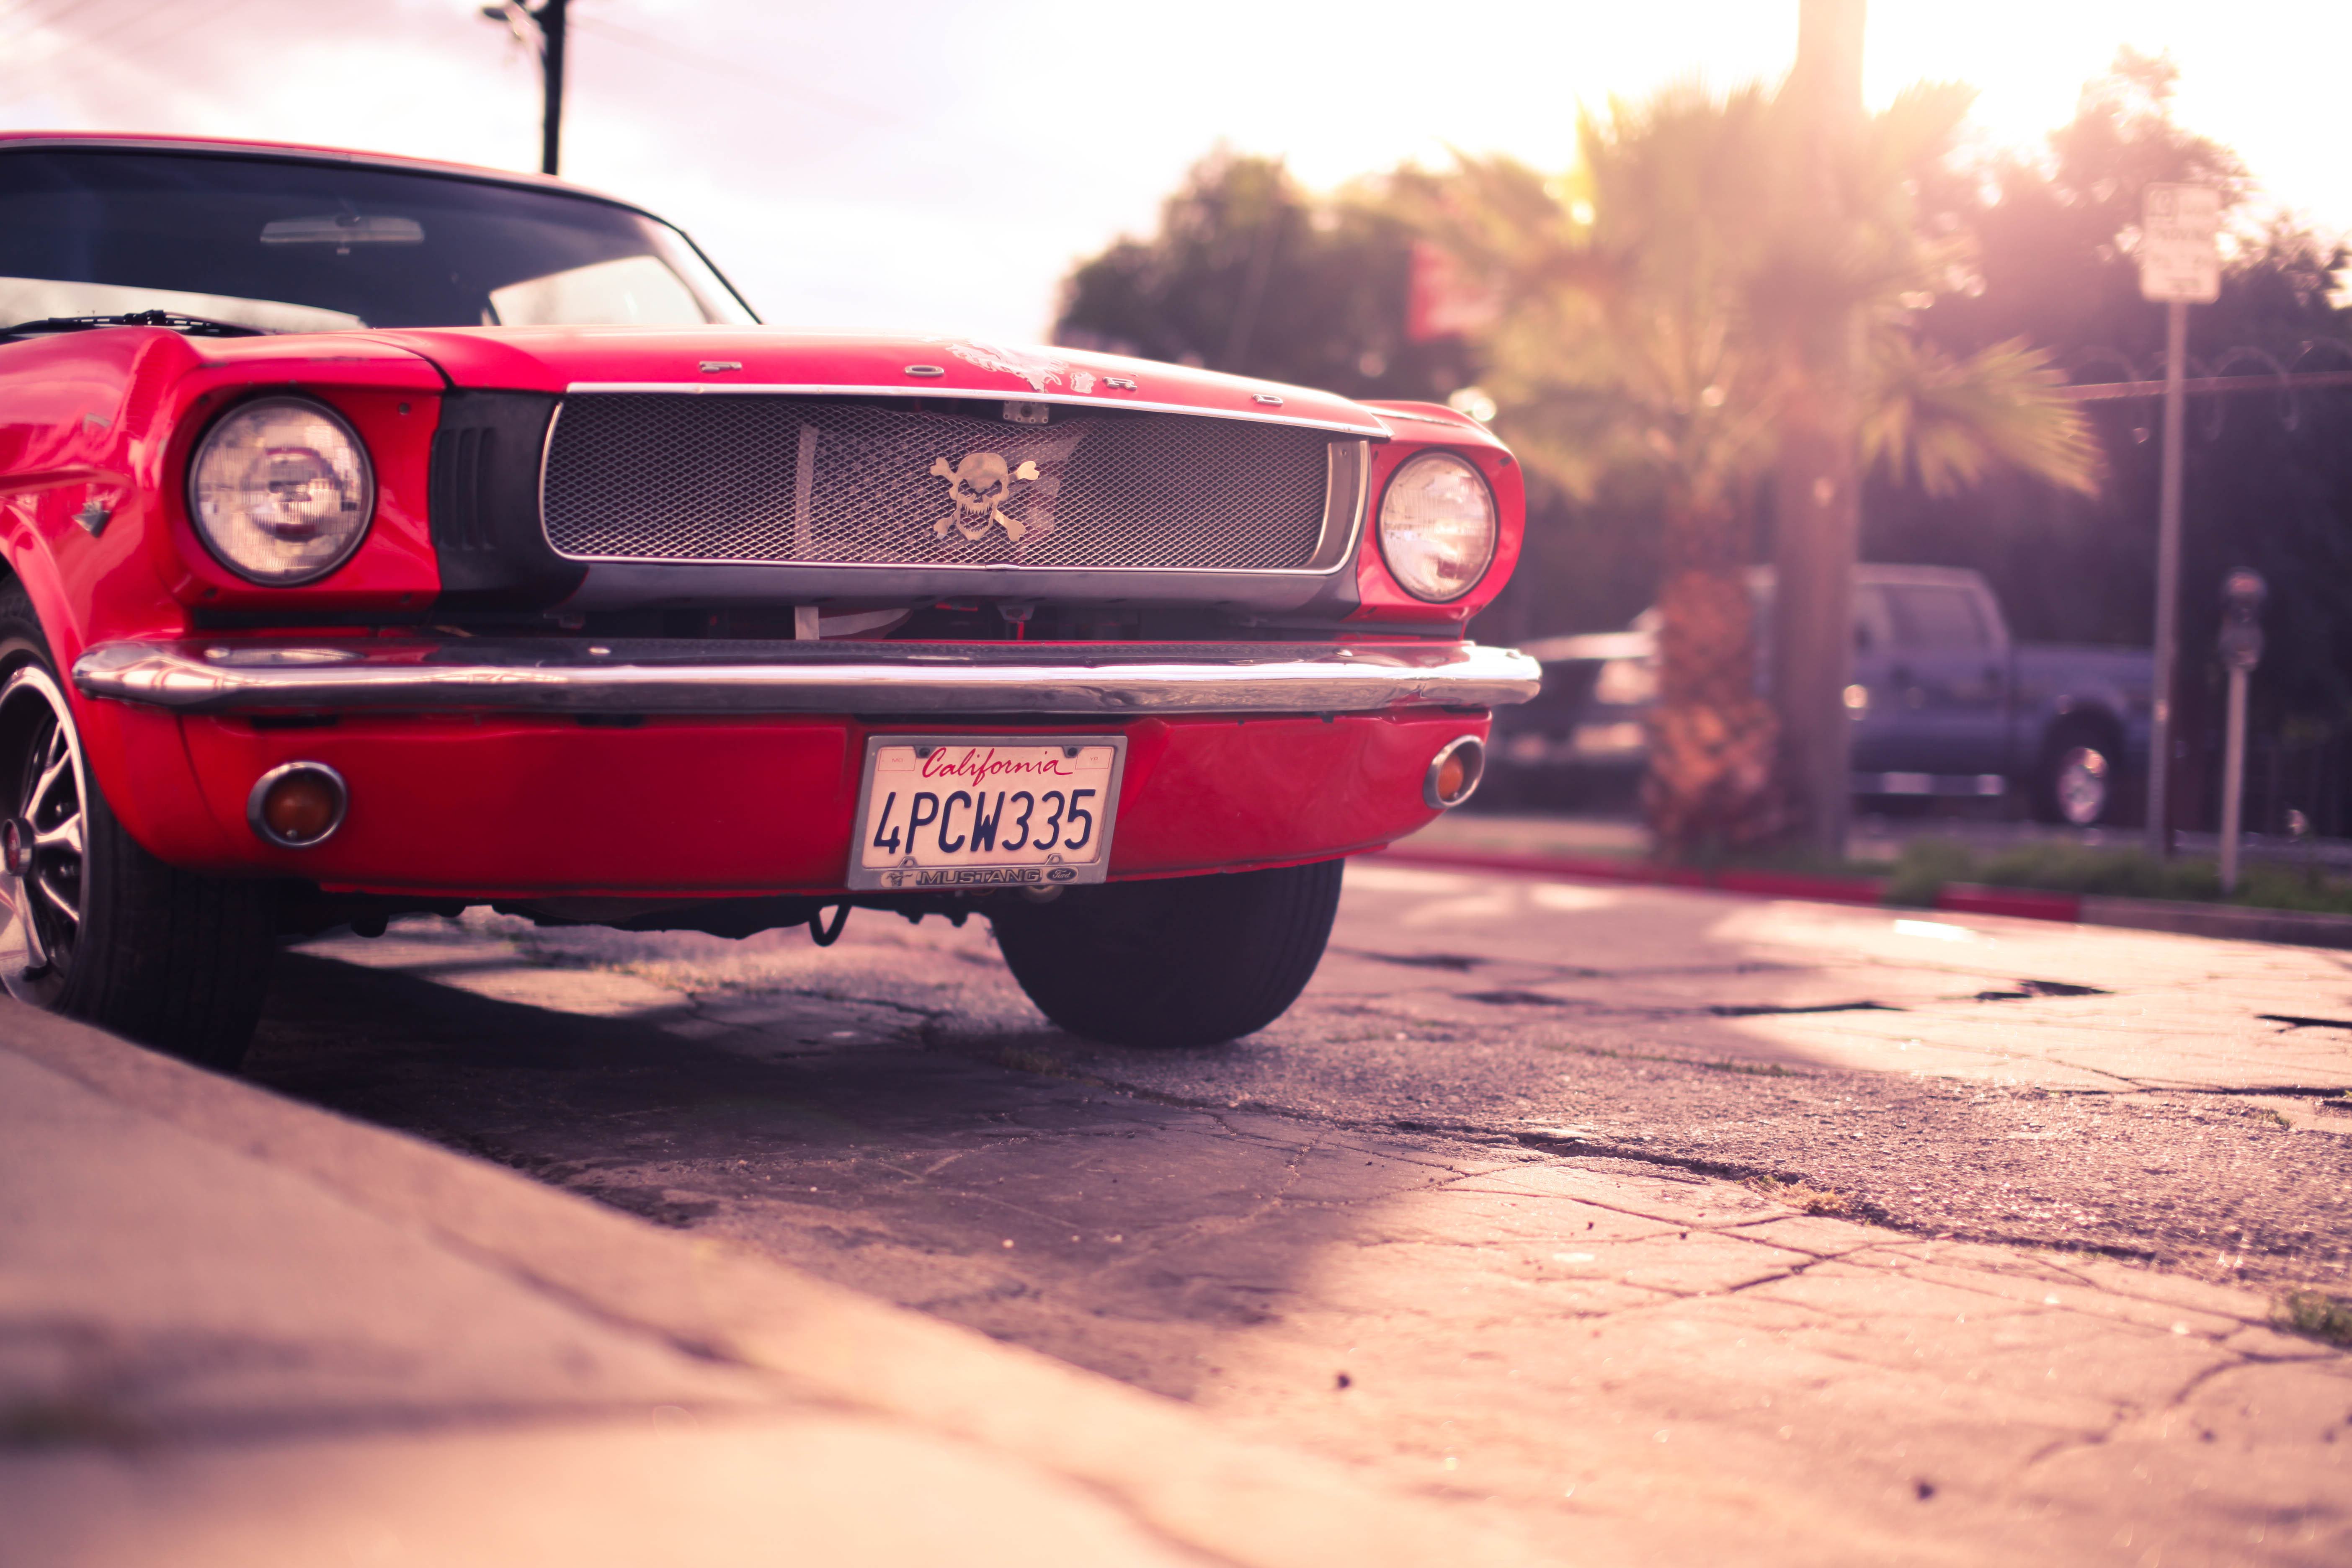 4k Wallpaper Cars Red Ford Mustang